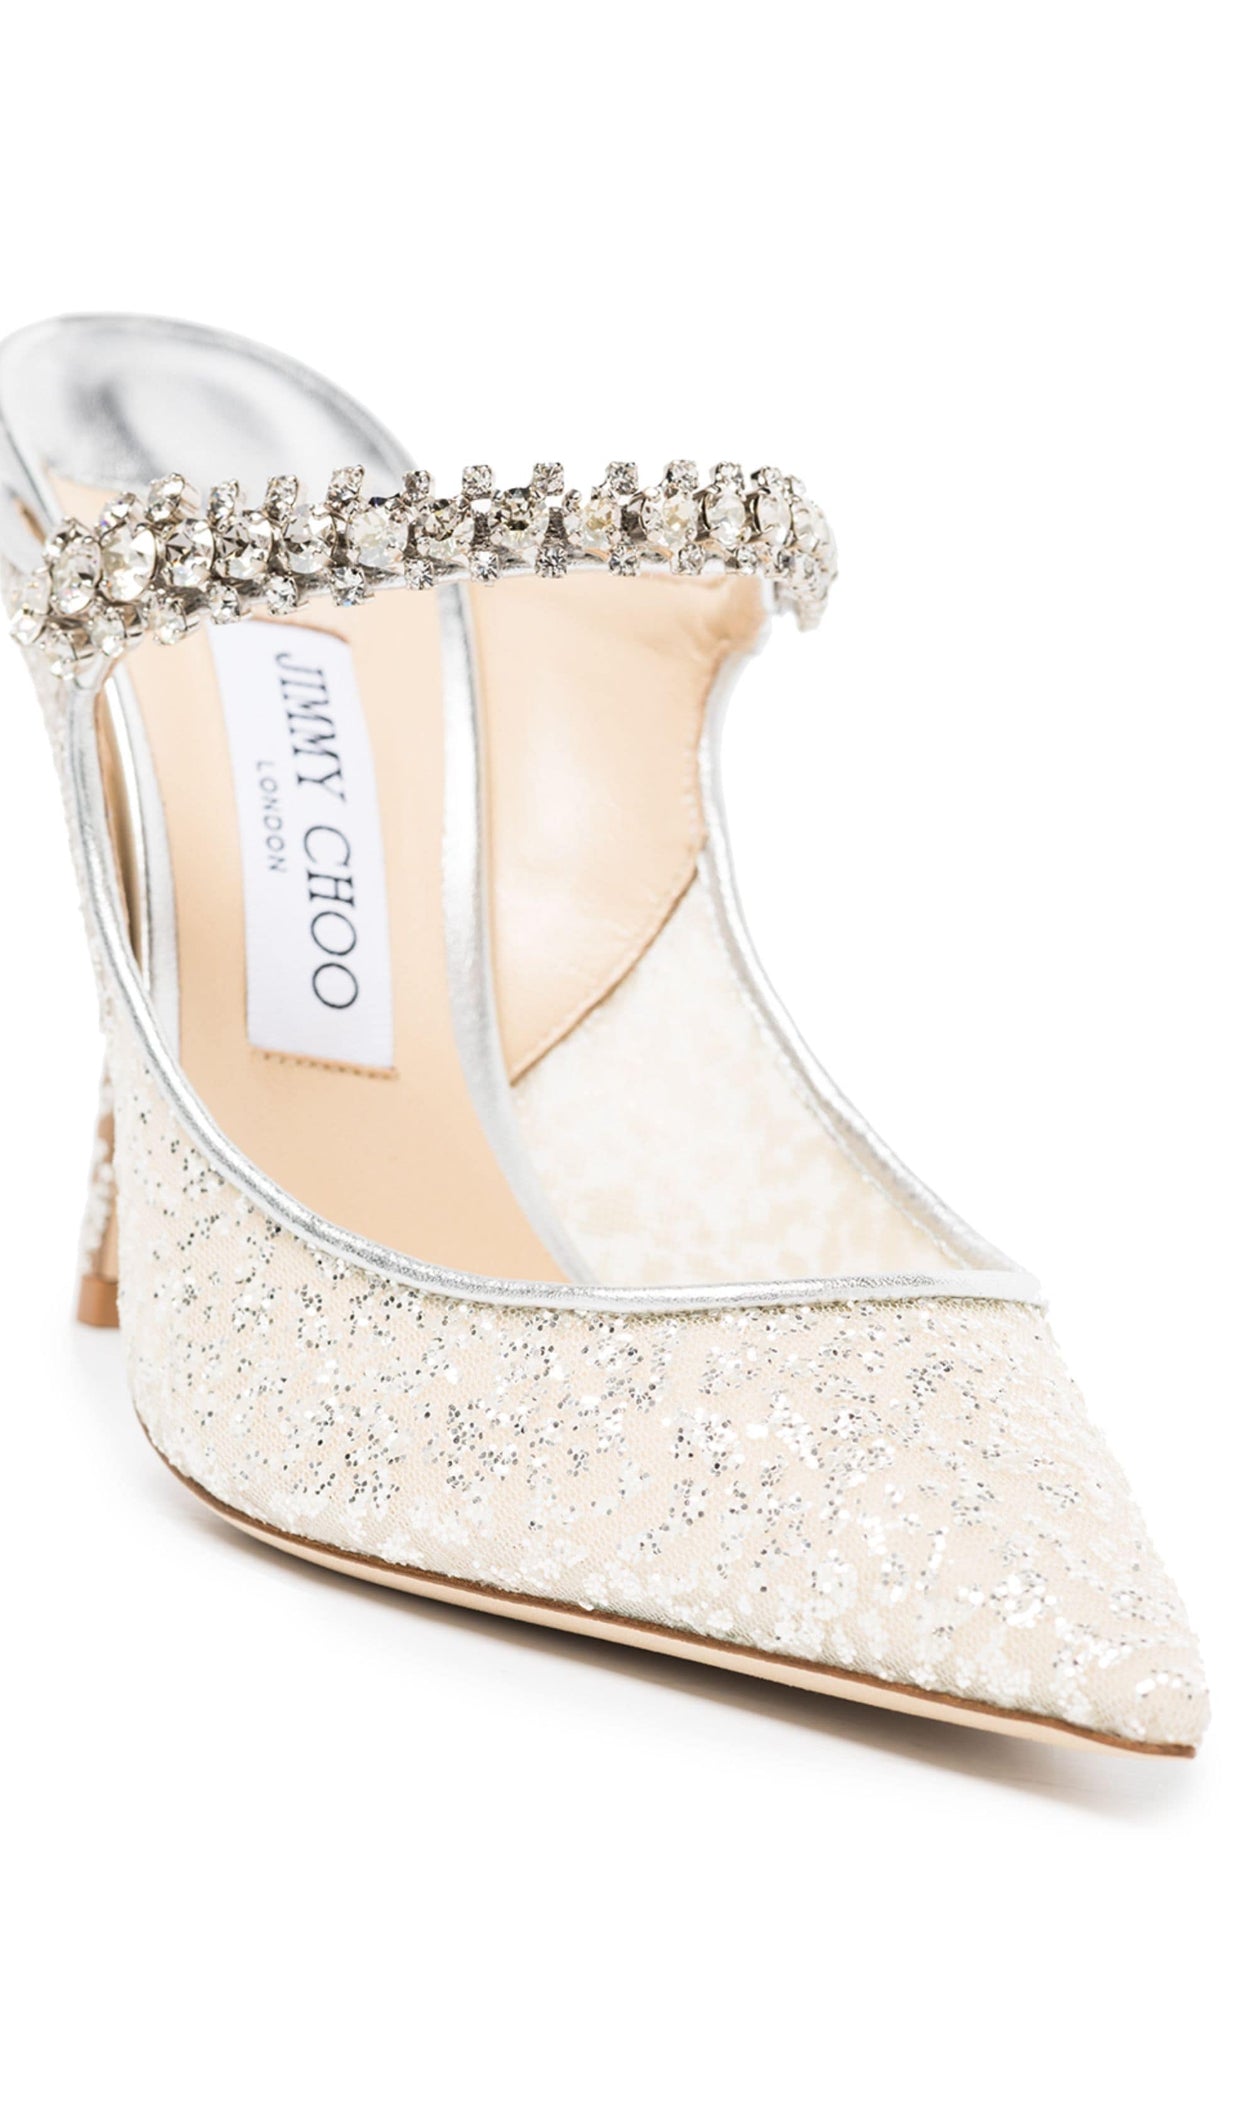 Jimmy Choo Bing 100mm shoes for rent